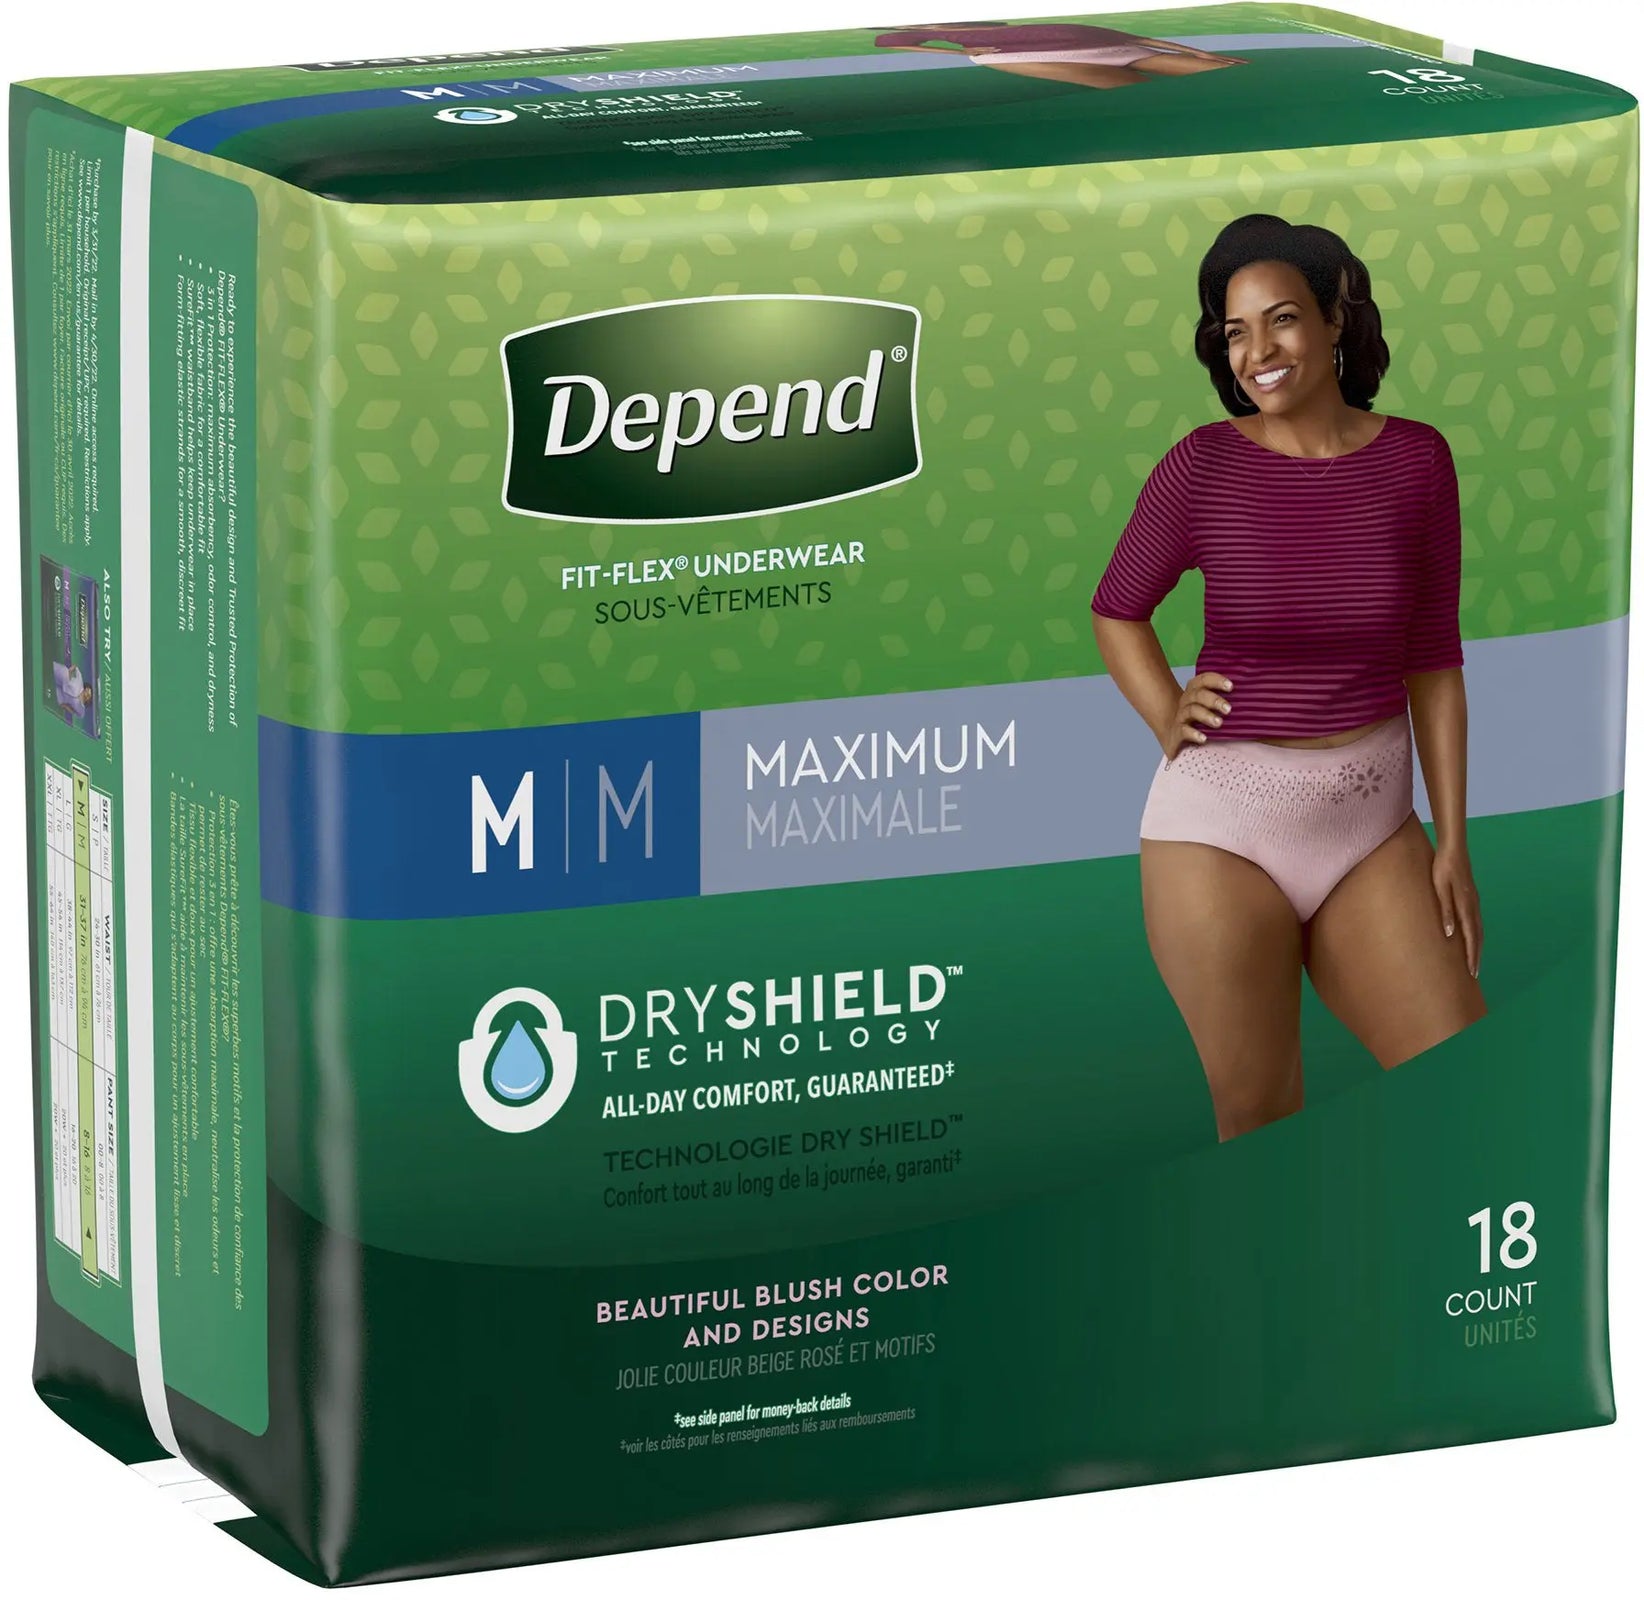 Depend Fit Flex Incontinence Underwear for Women, Maximum Absorbency,  Medium, Tan (Packaging may vary), 18 Ea, 2 pack 